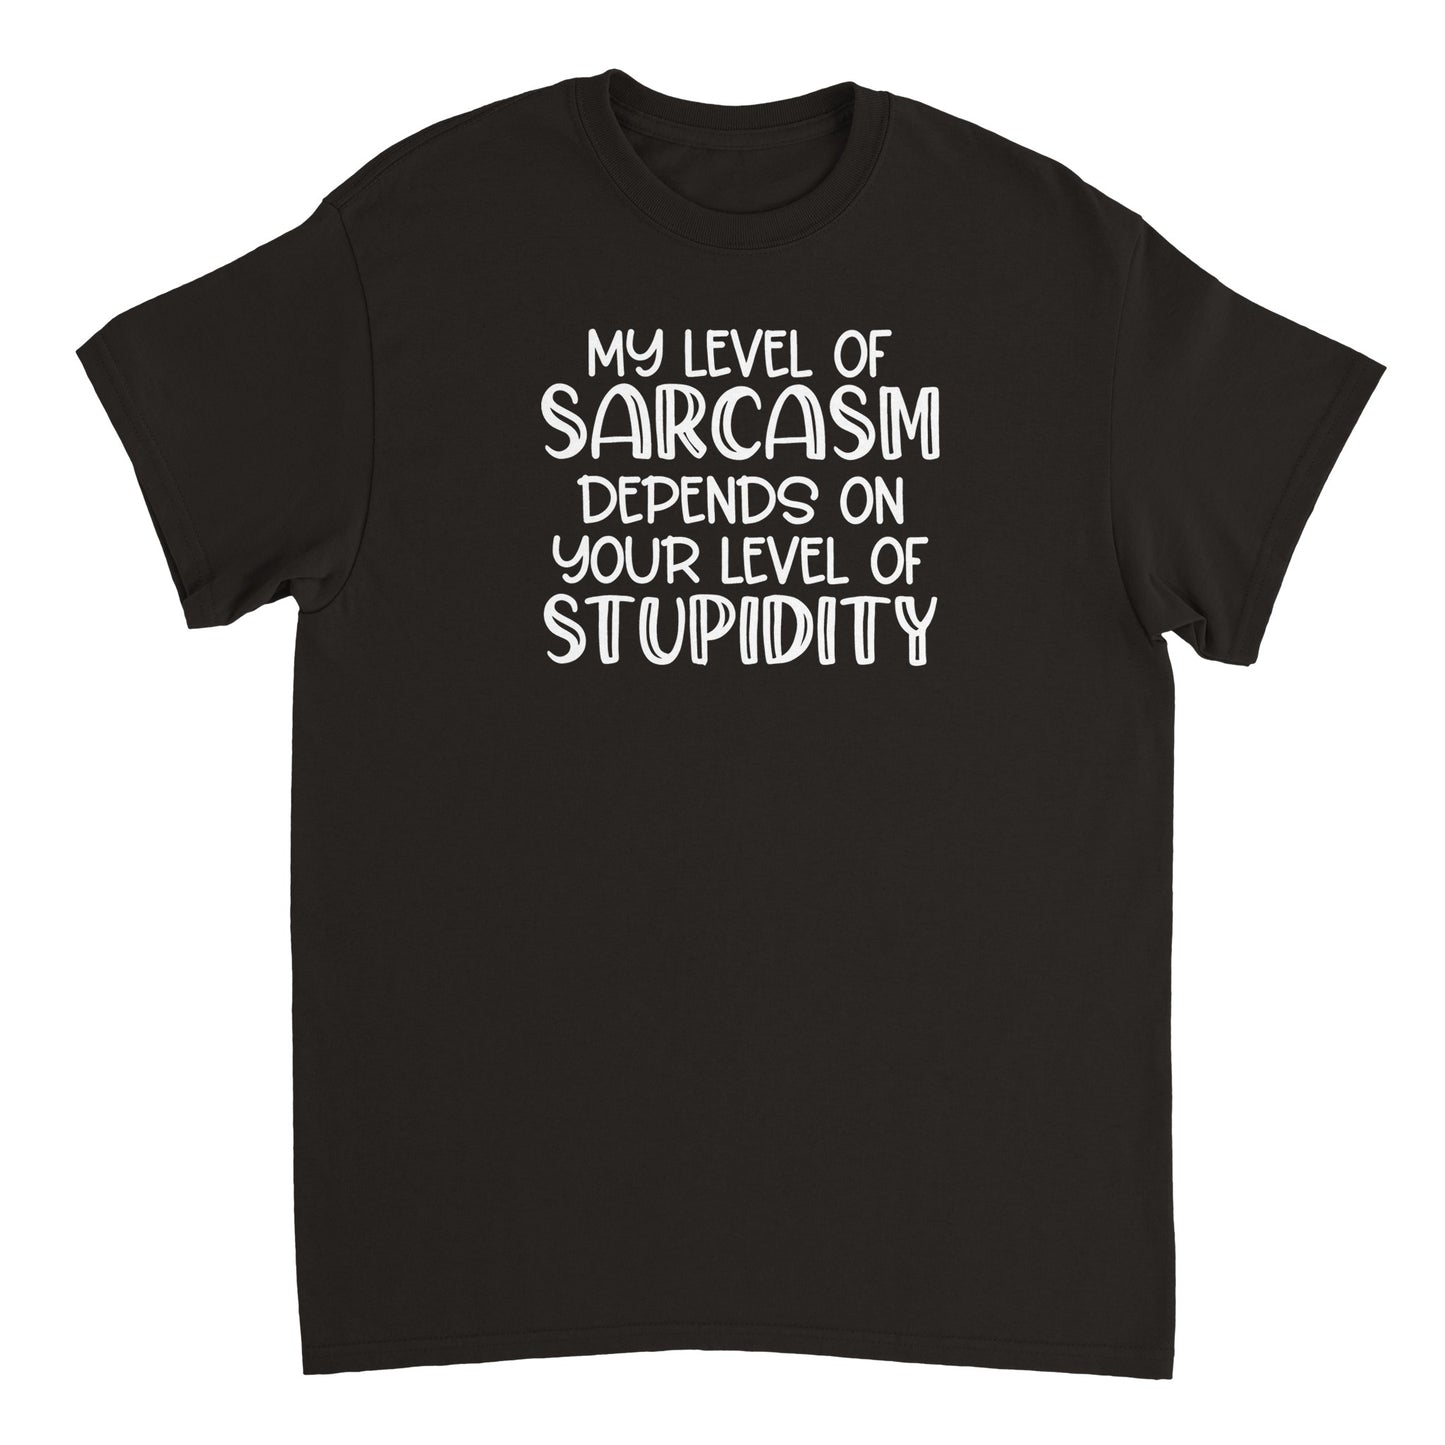 My Level of Sarcasm Depends on Your Level of Stupidity T-shirt - Mister Snarky's